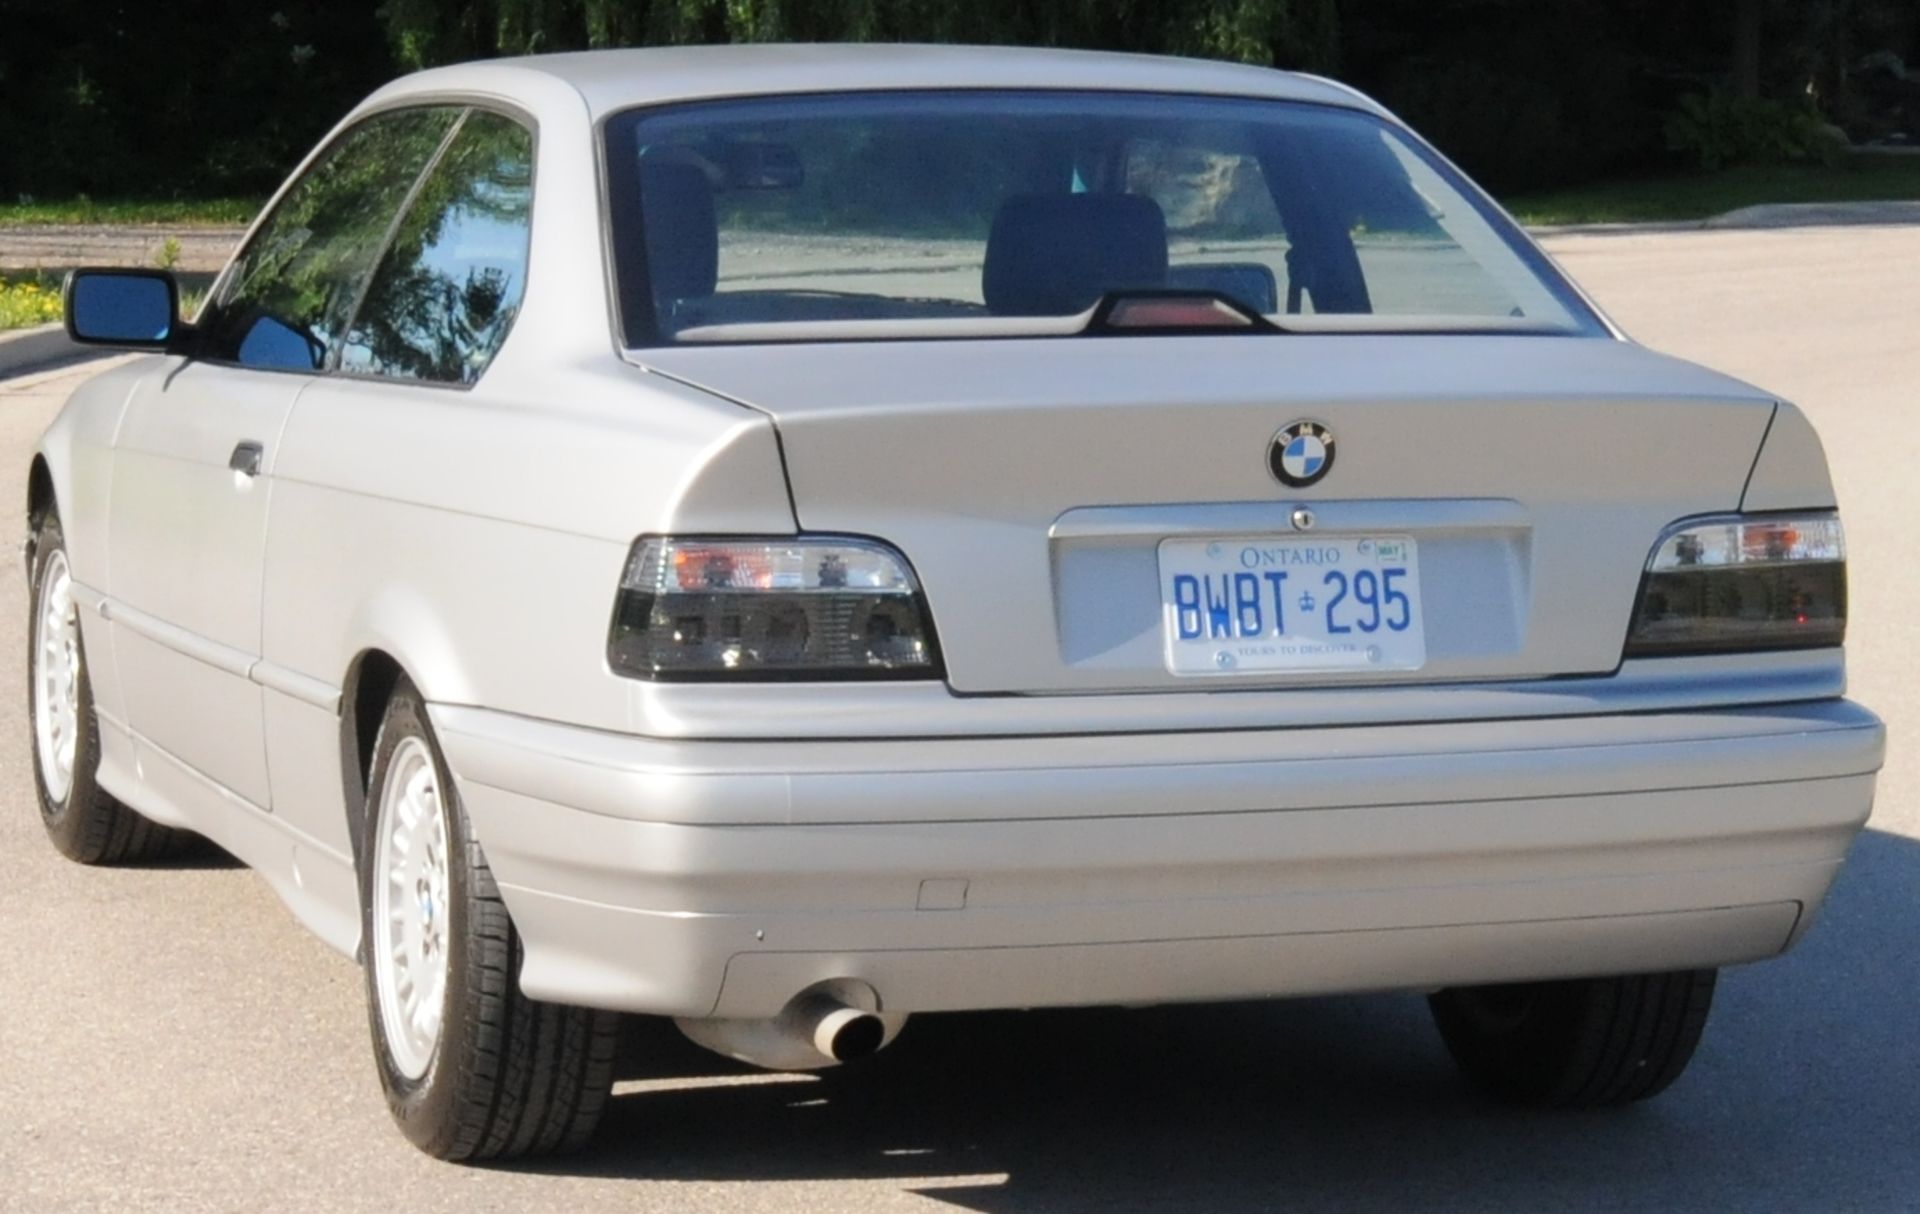 BMW (1993) E36 316IS COUPE WITH 1.8L VANOS VVT ENGINE, 5 SPEED MANUAL TRANSMISSION, REAR WHEEL - Image 4 of 5